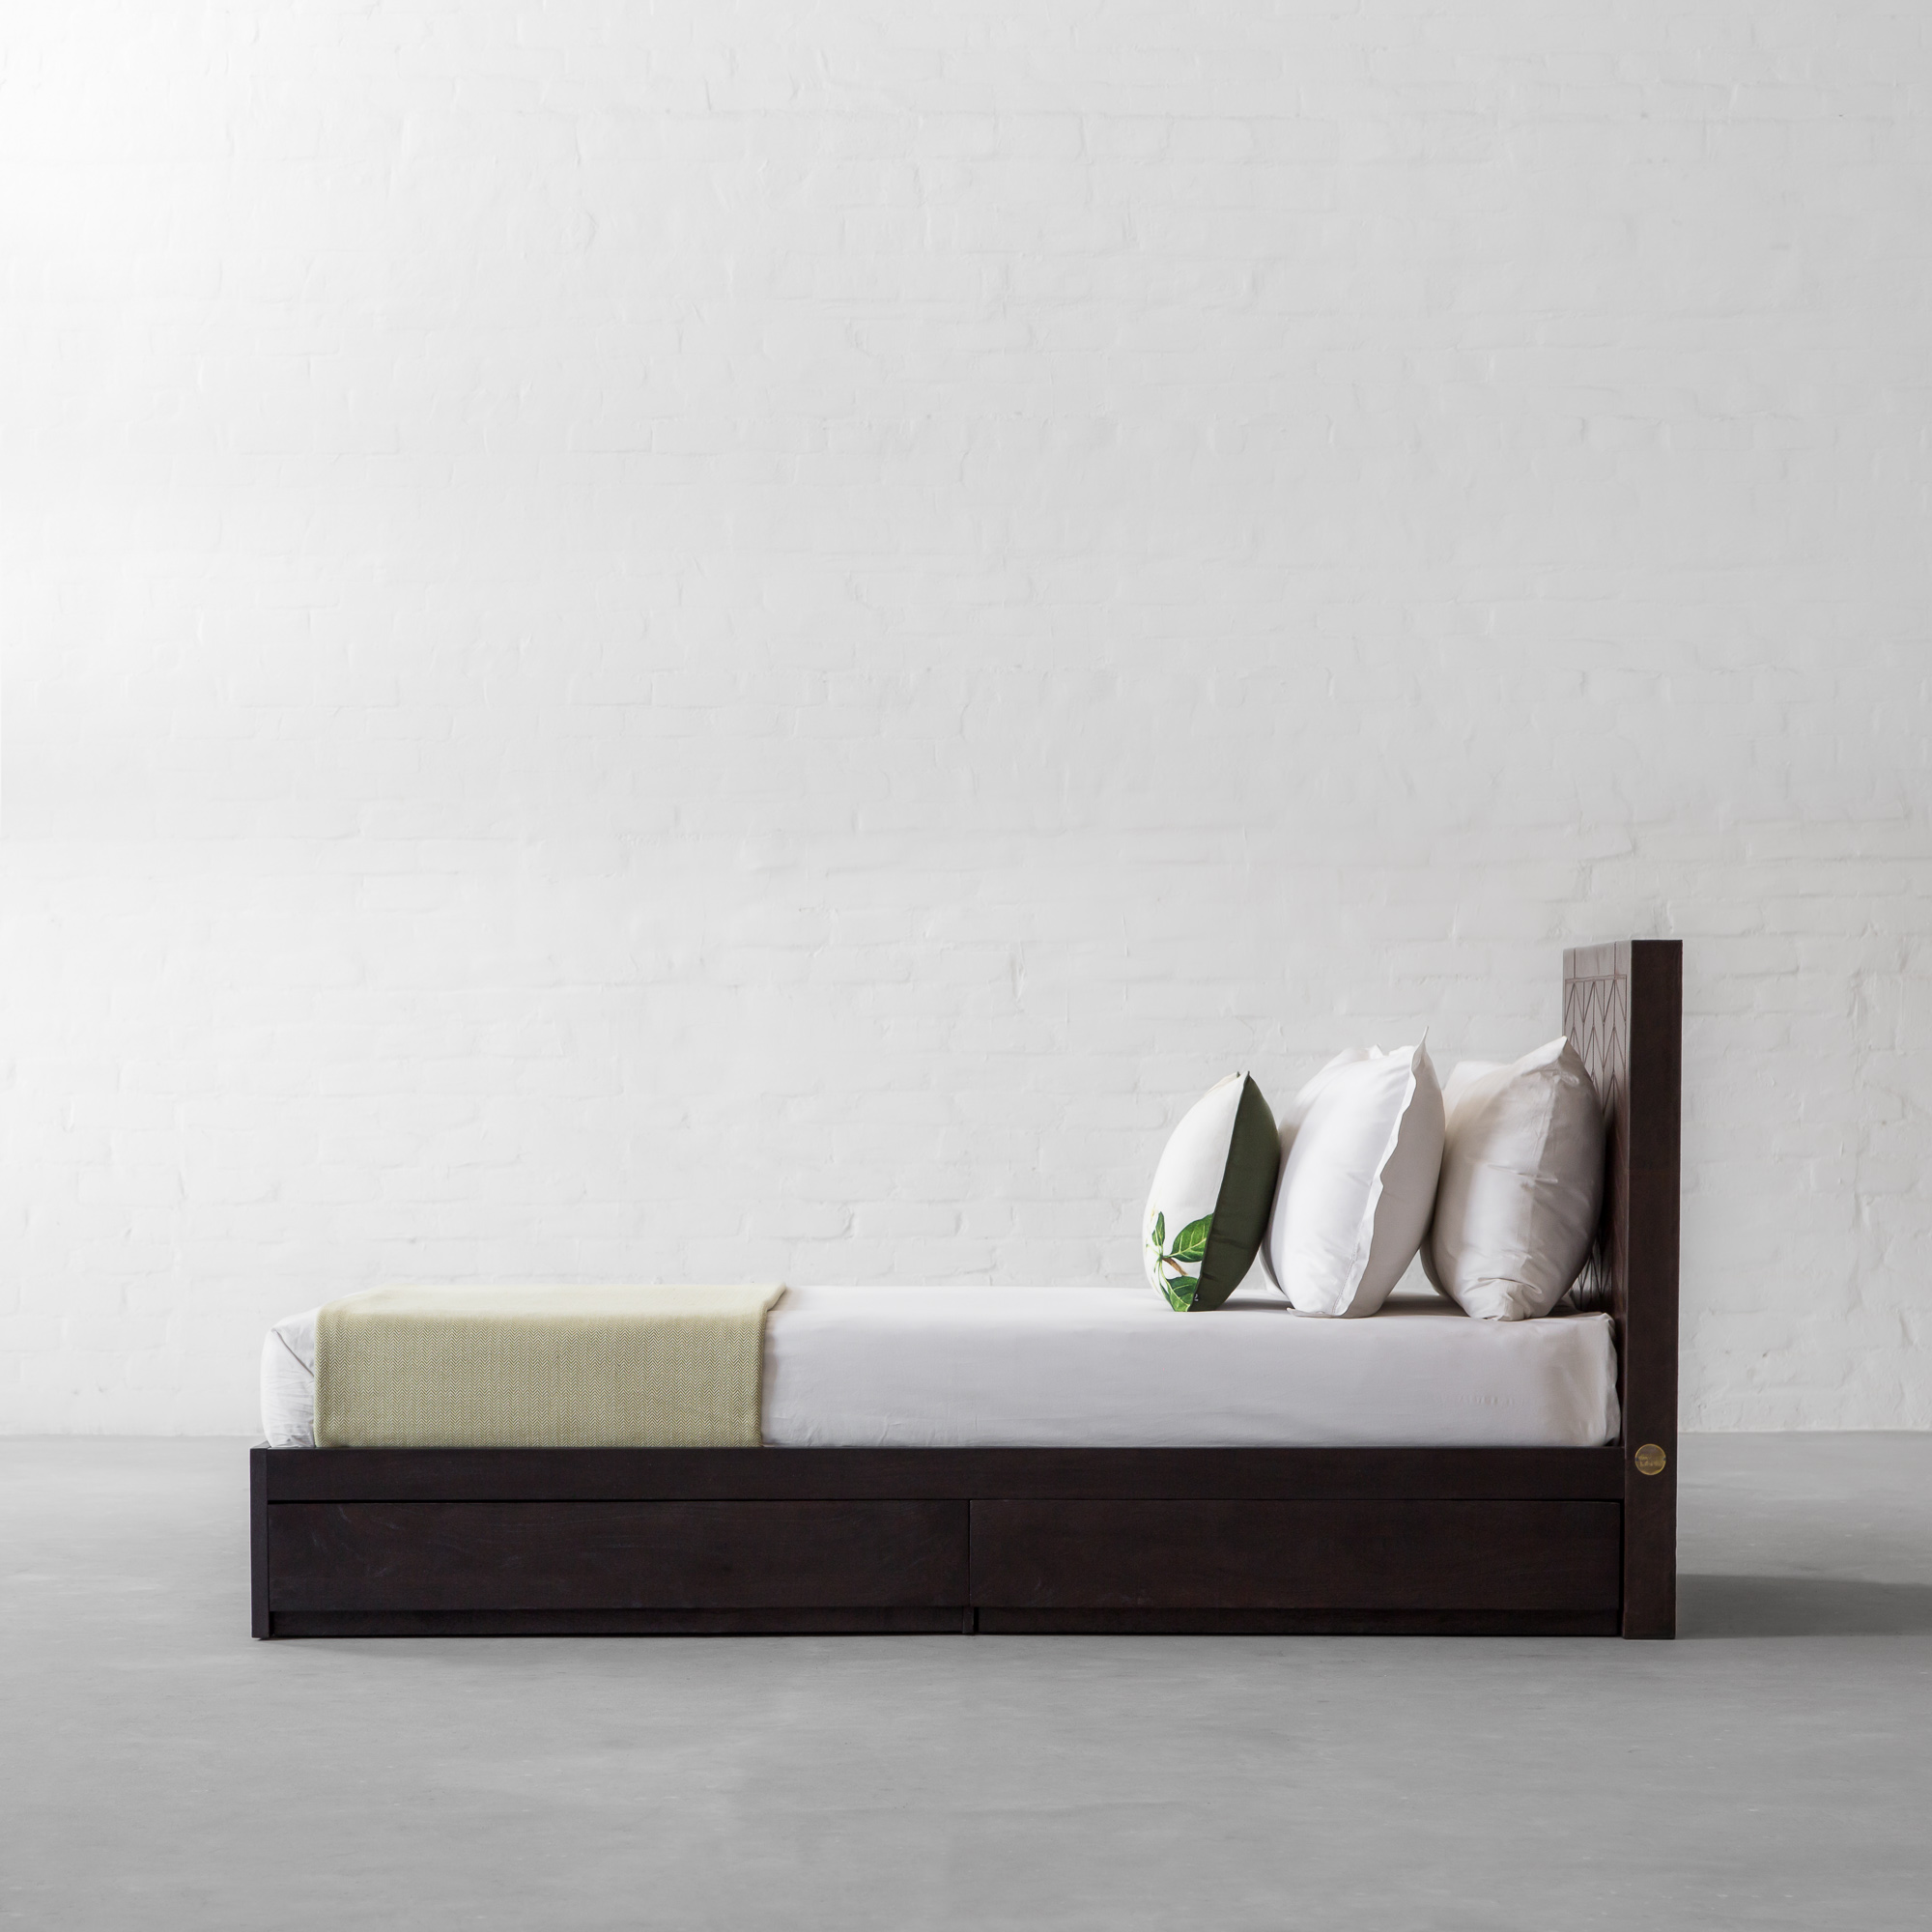 EDWARD BED COLLECTION - SINGLE BED